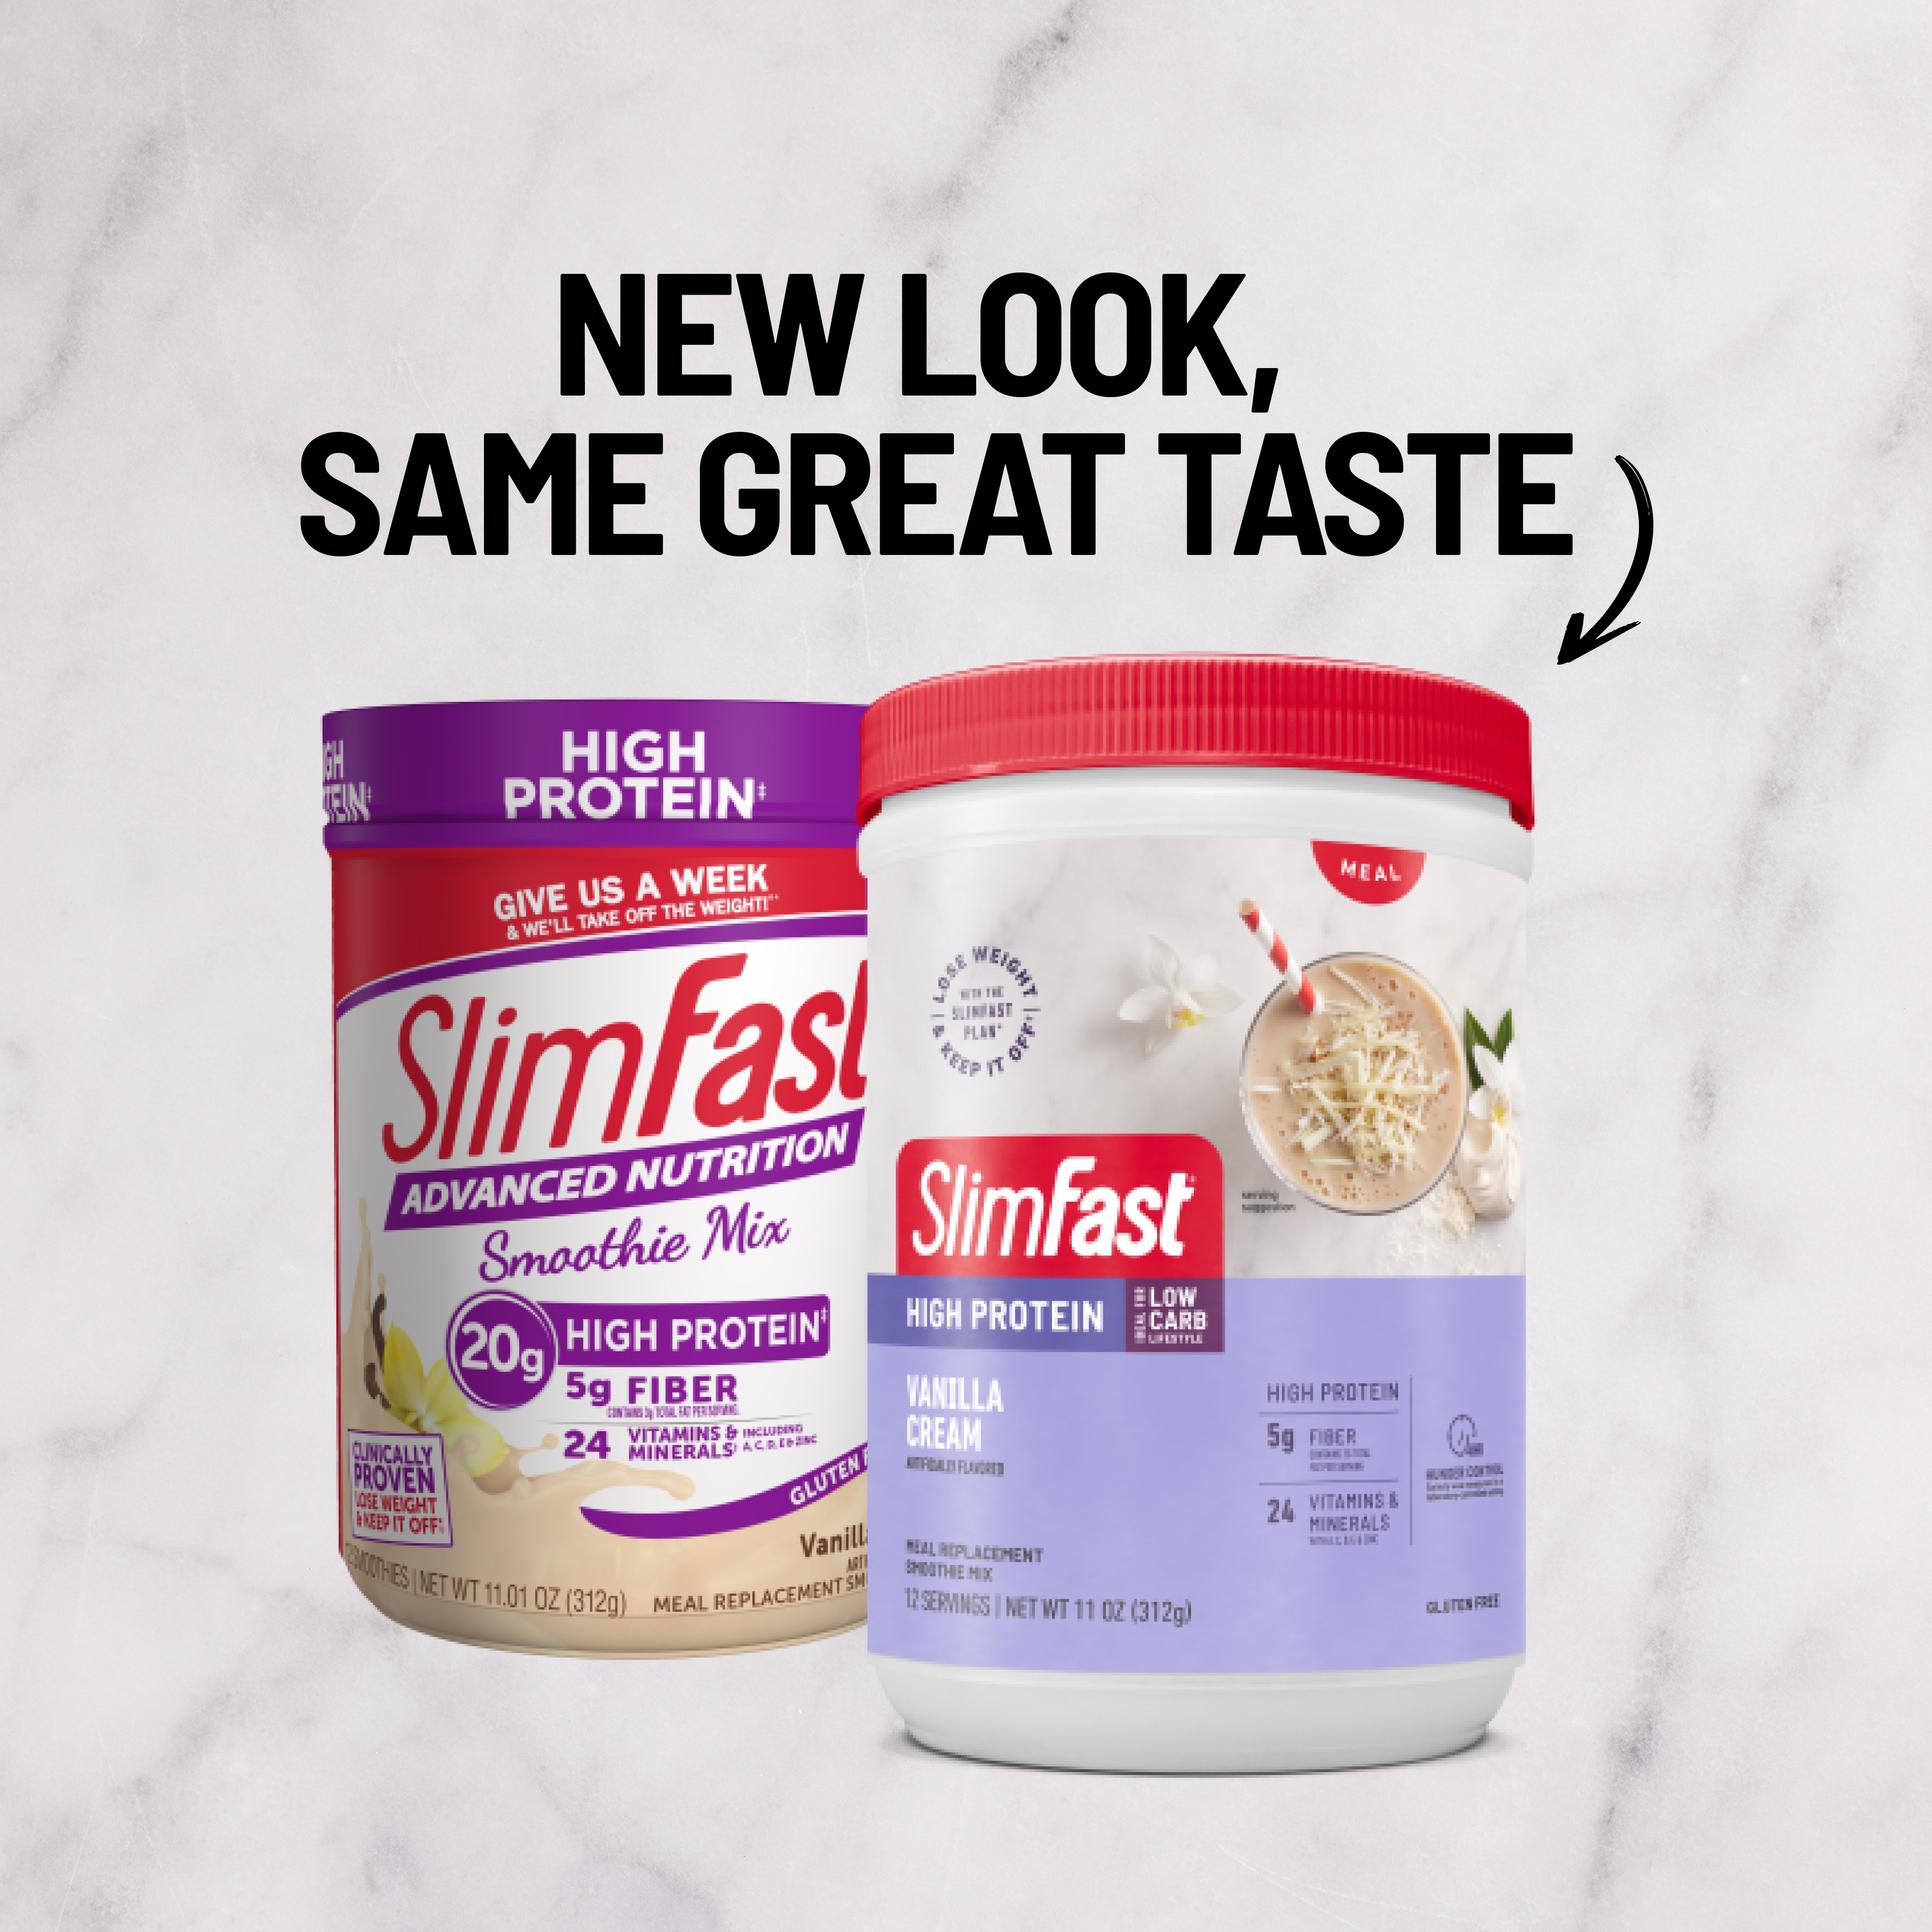 SlimFast High Protein, Vanilla Cream, Meal Replacement Smoothie Mix, 12 Servings - image 2 of 6